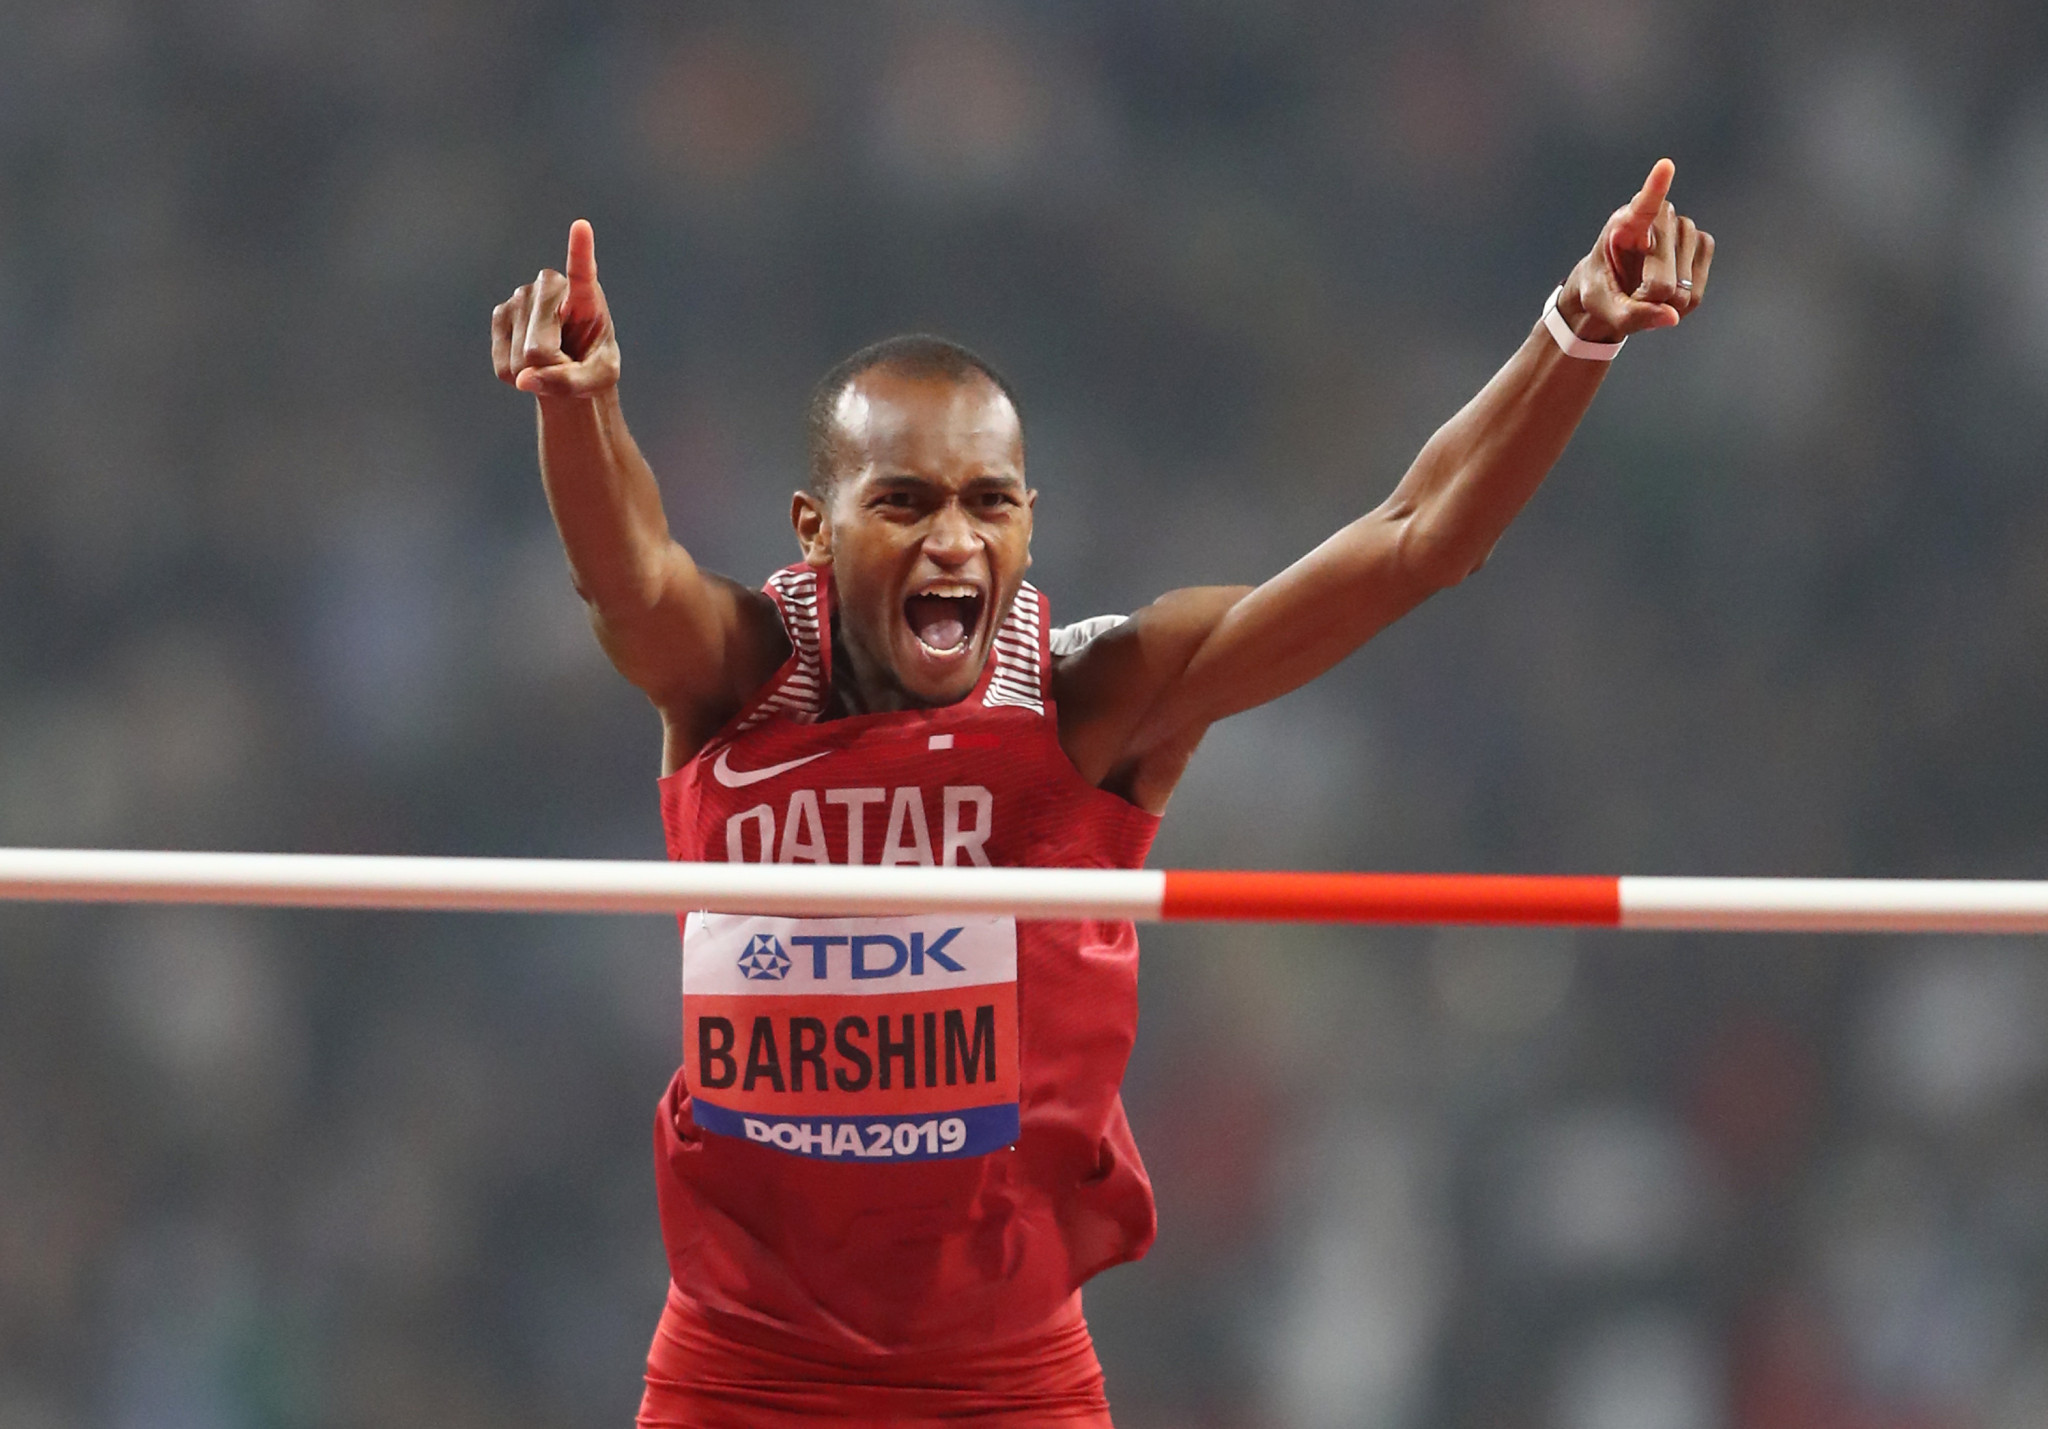 Barshim's emotions came pouring after his winning jump ©Getty Images